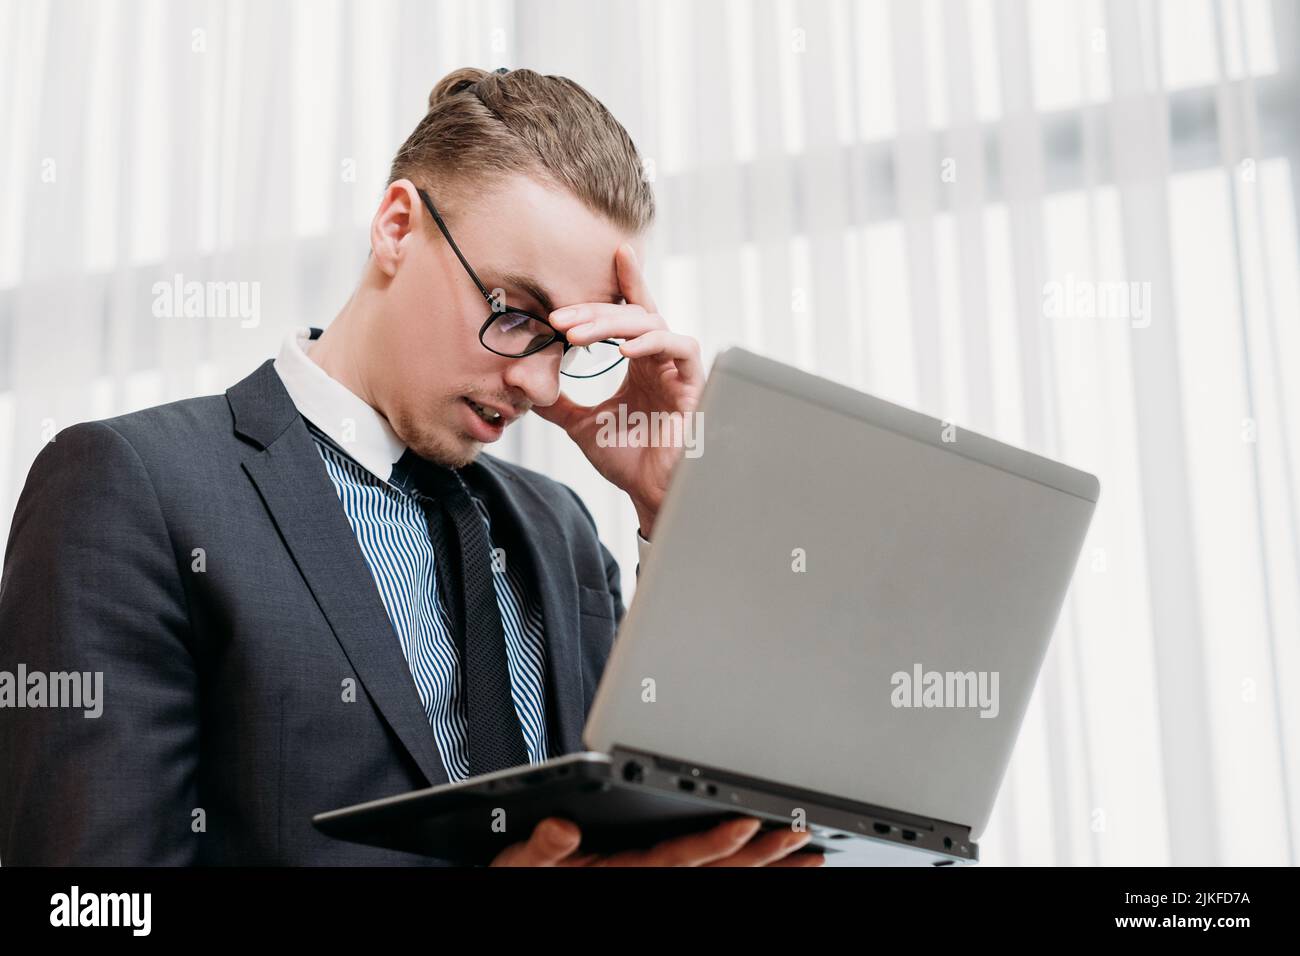 financial problems failure stressed business man Stock Photo